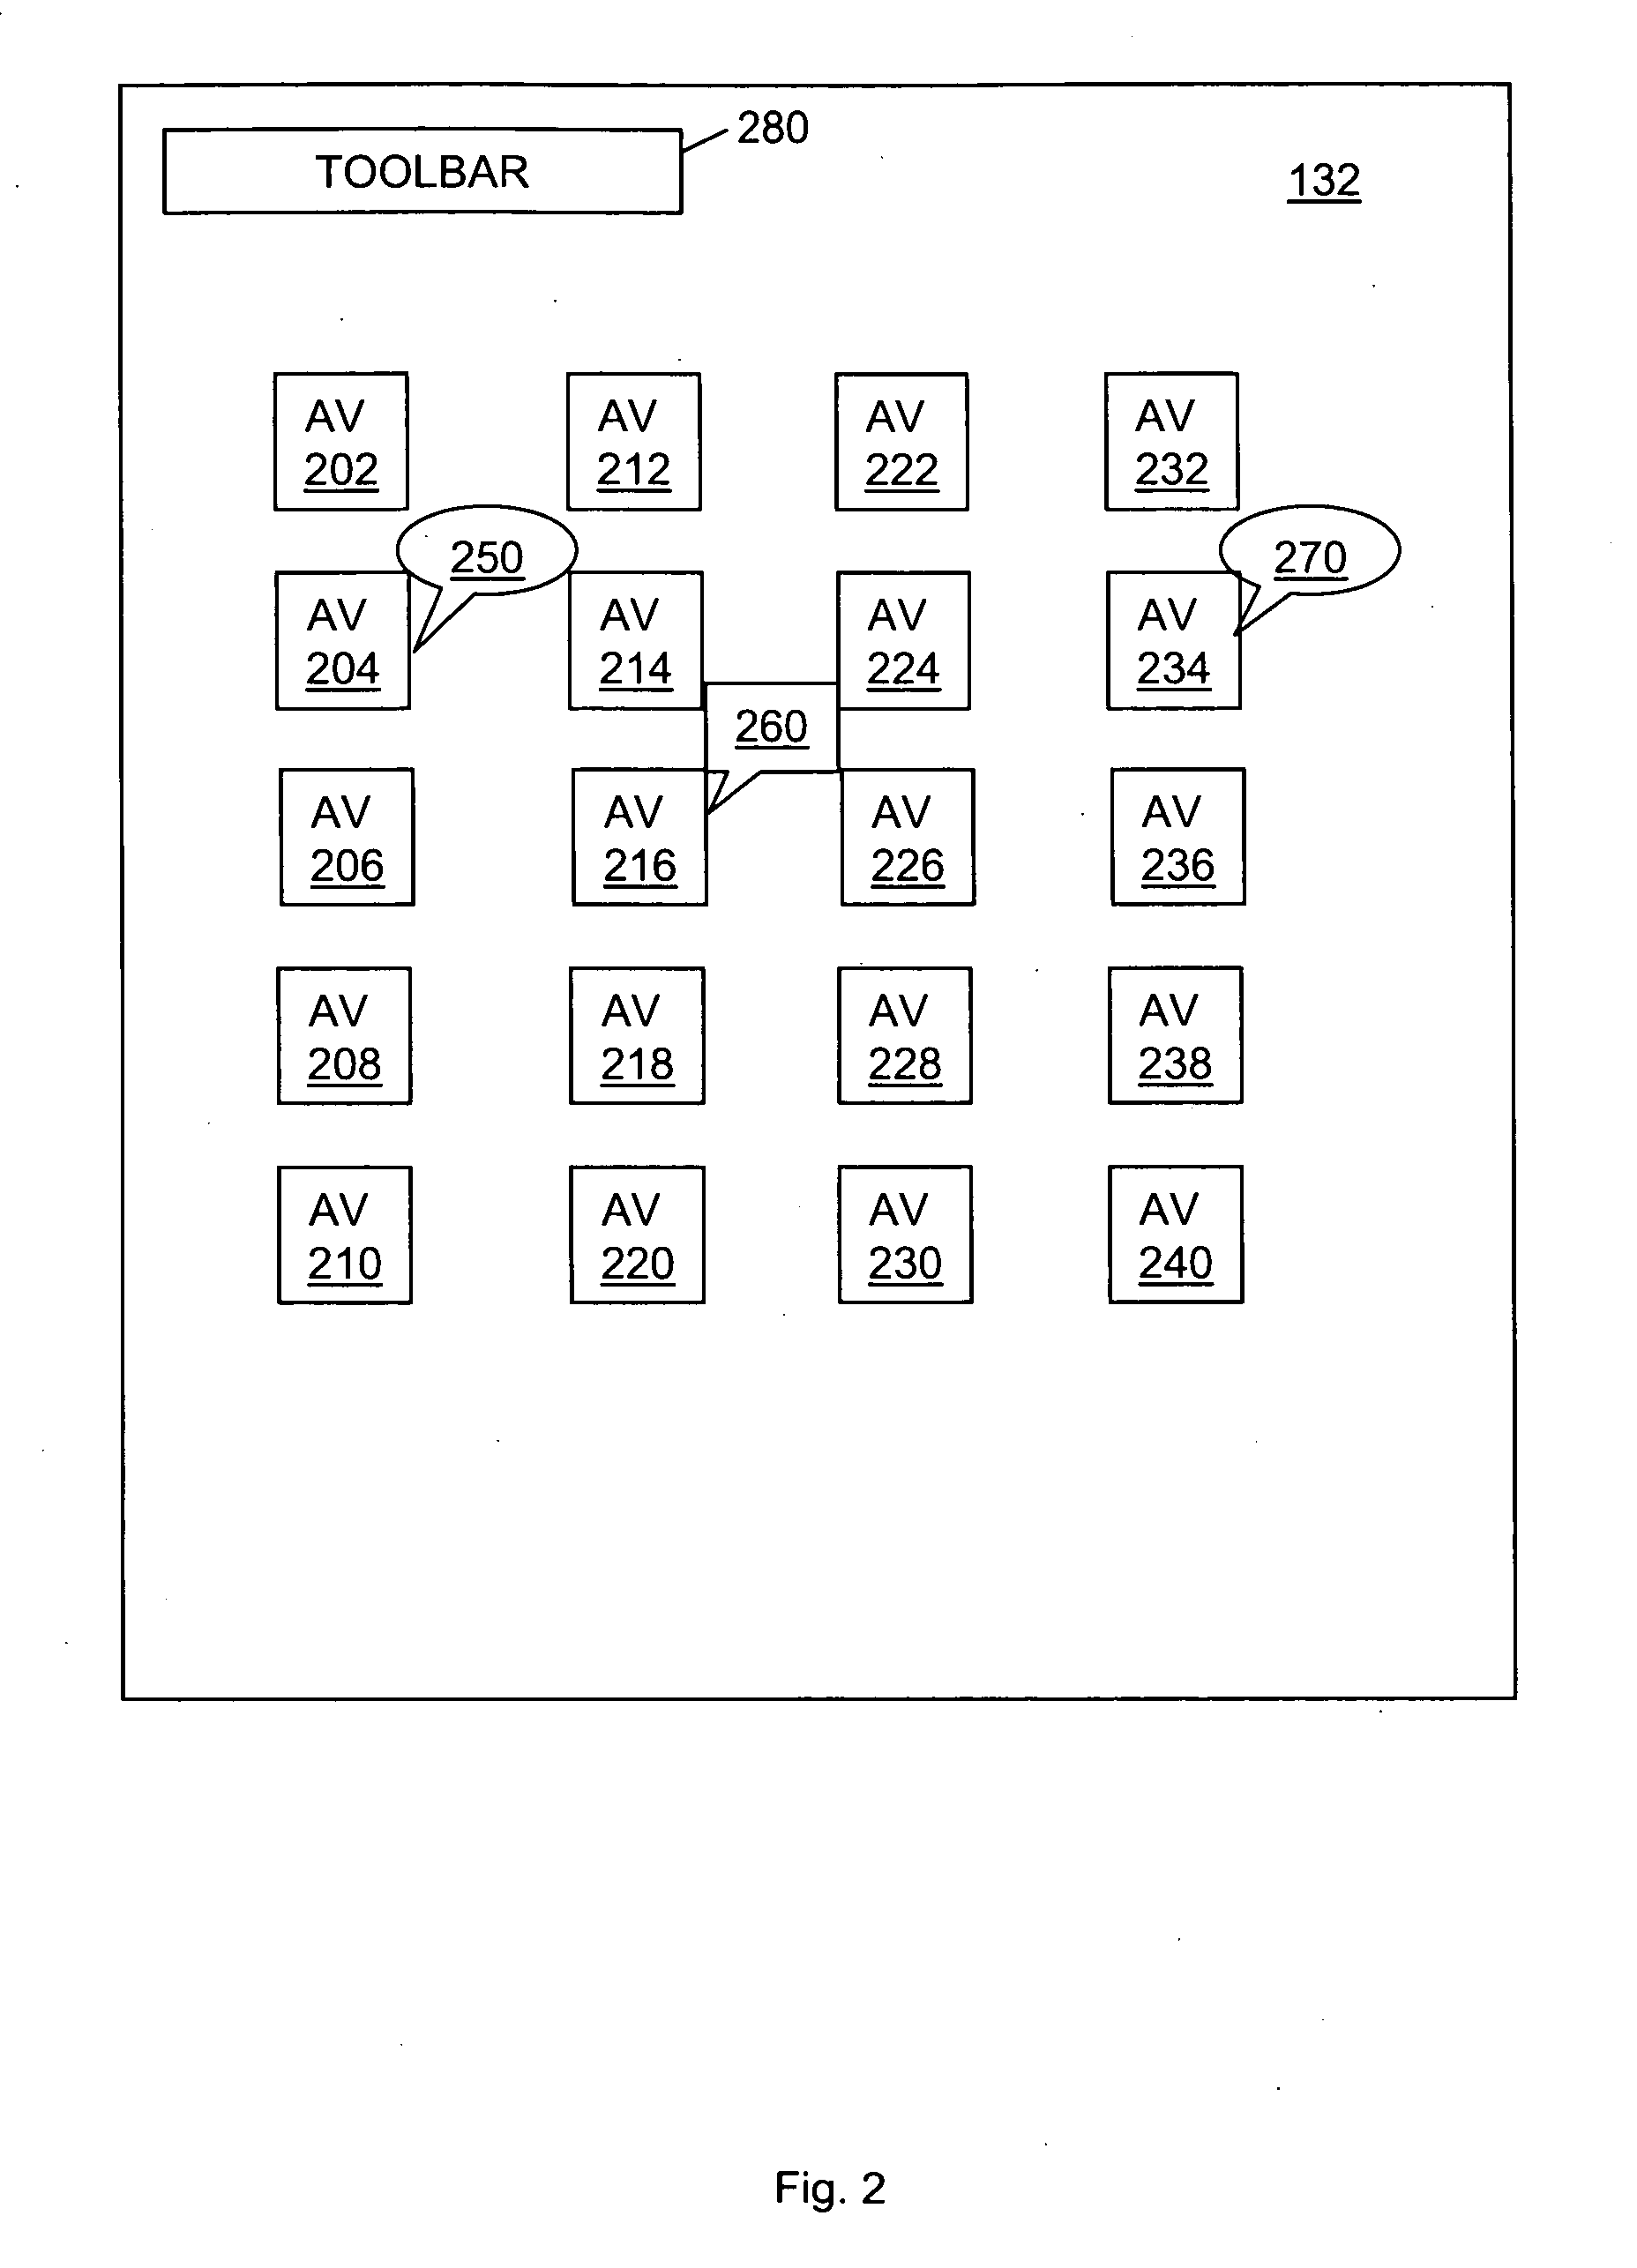 System and method for providing a multi-dimensional contextual platform for managing a medical practice